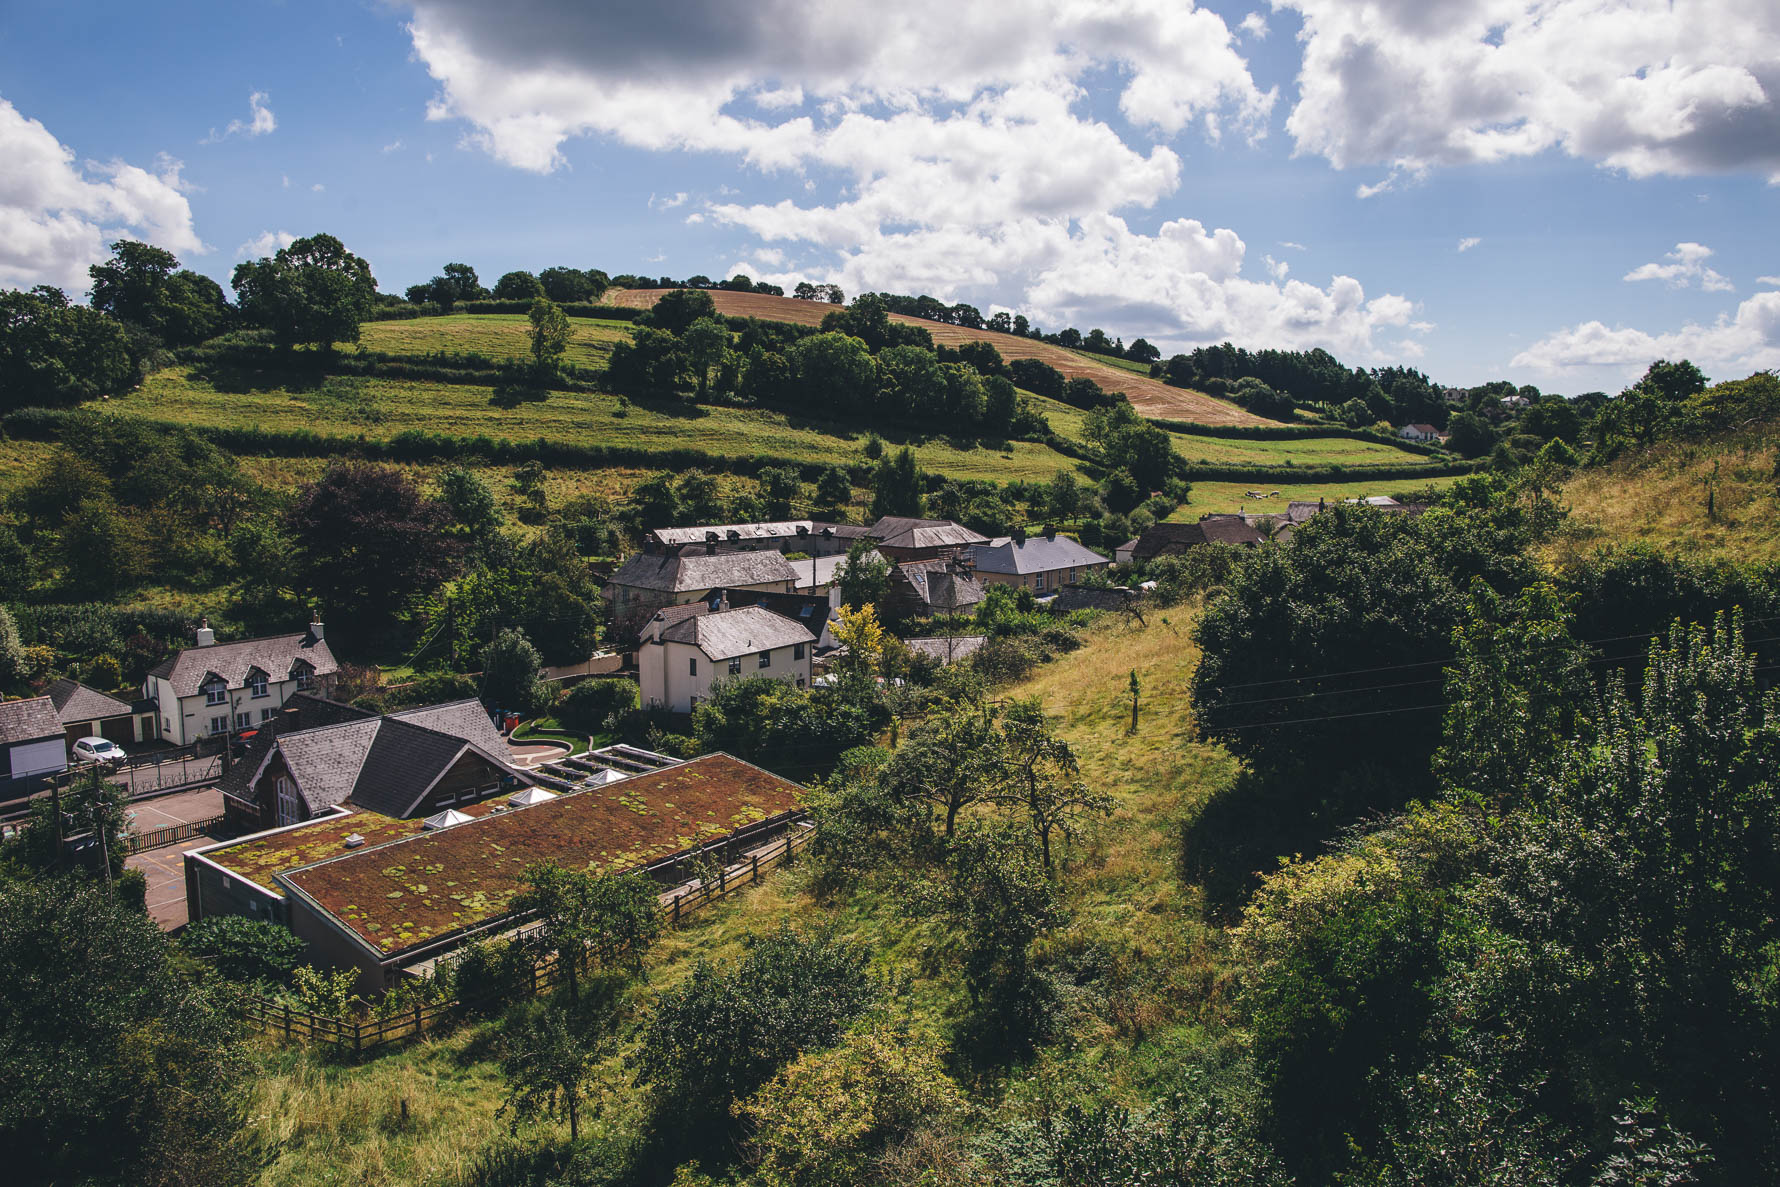 A rolling hillside village in Devonwith buildings in the centre of the picture and greenery in the foreground and background against a blue sky with white clouds